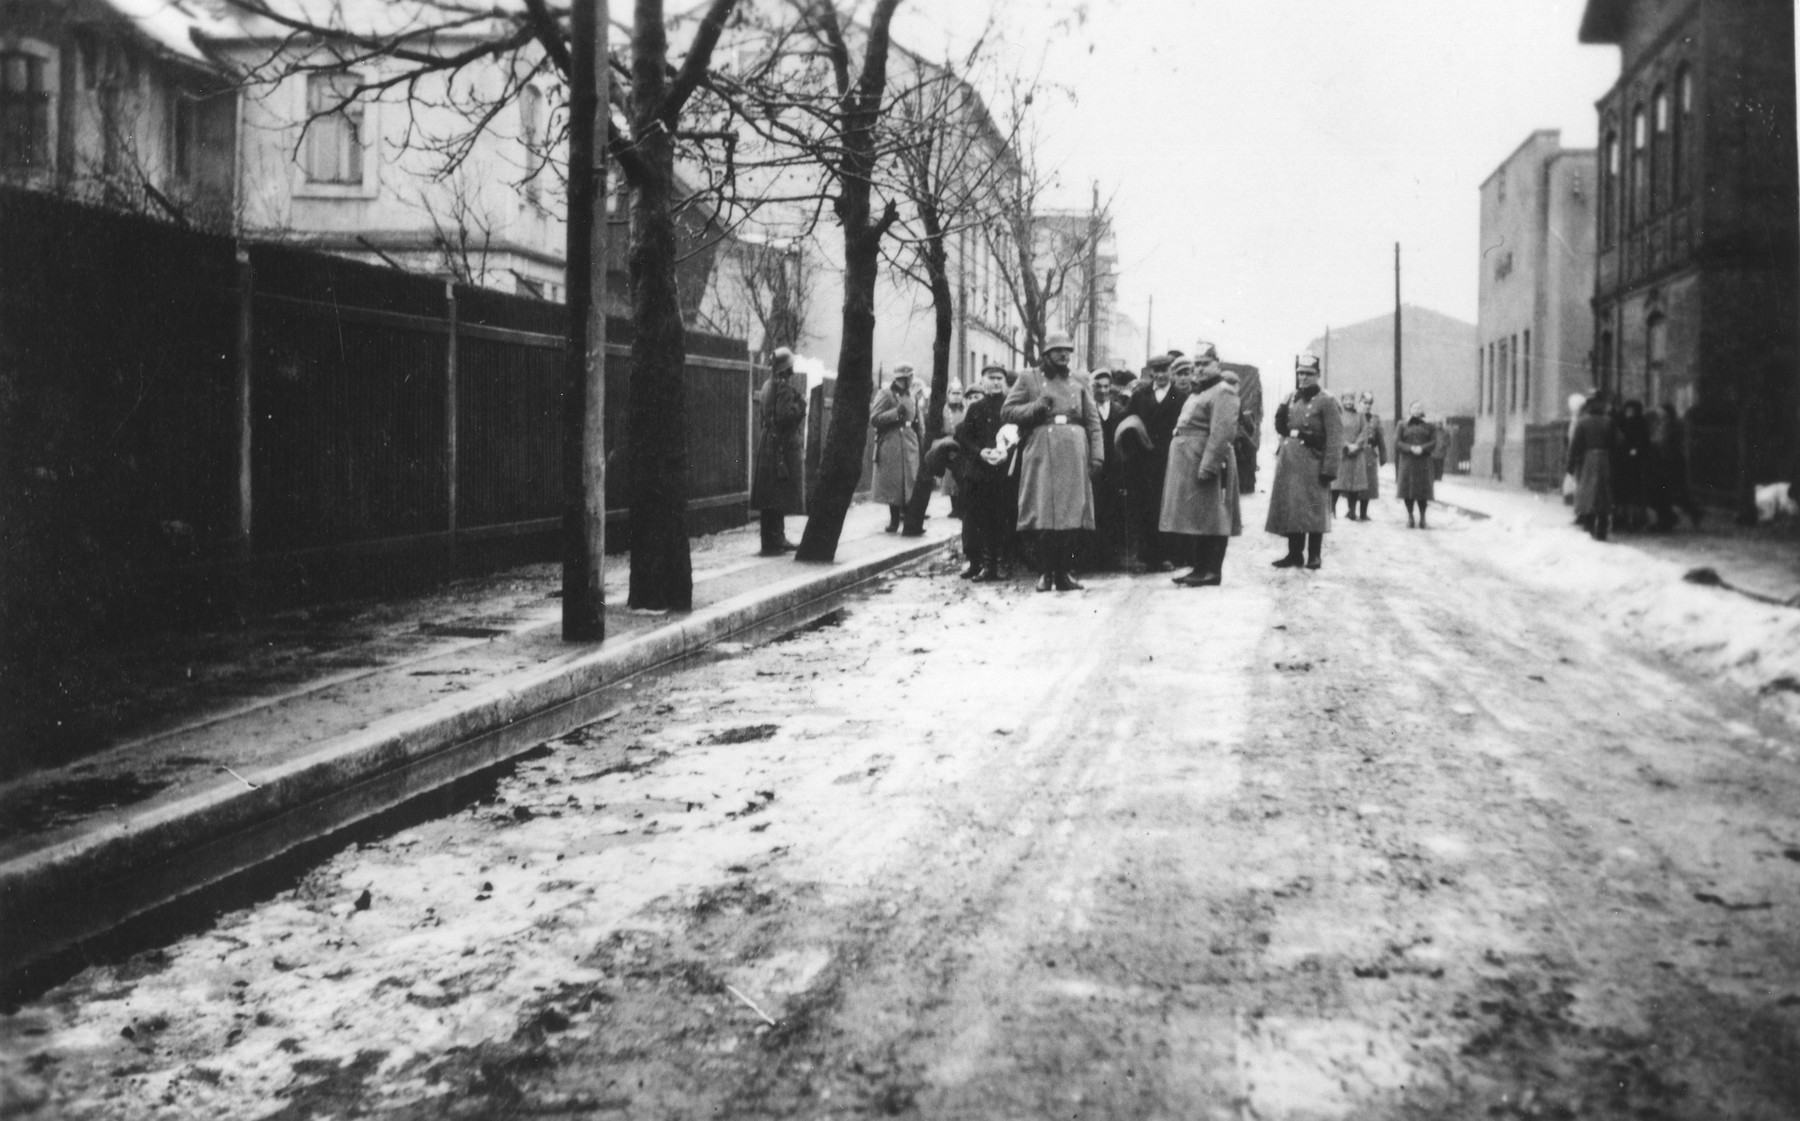 Jews are rounded up and assembled in columns on a street in the Zawiercie ghetto.